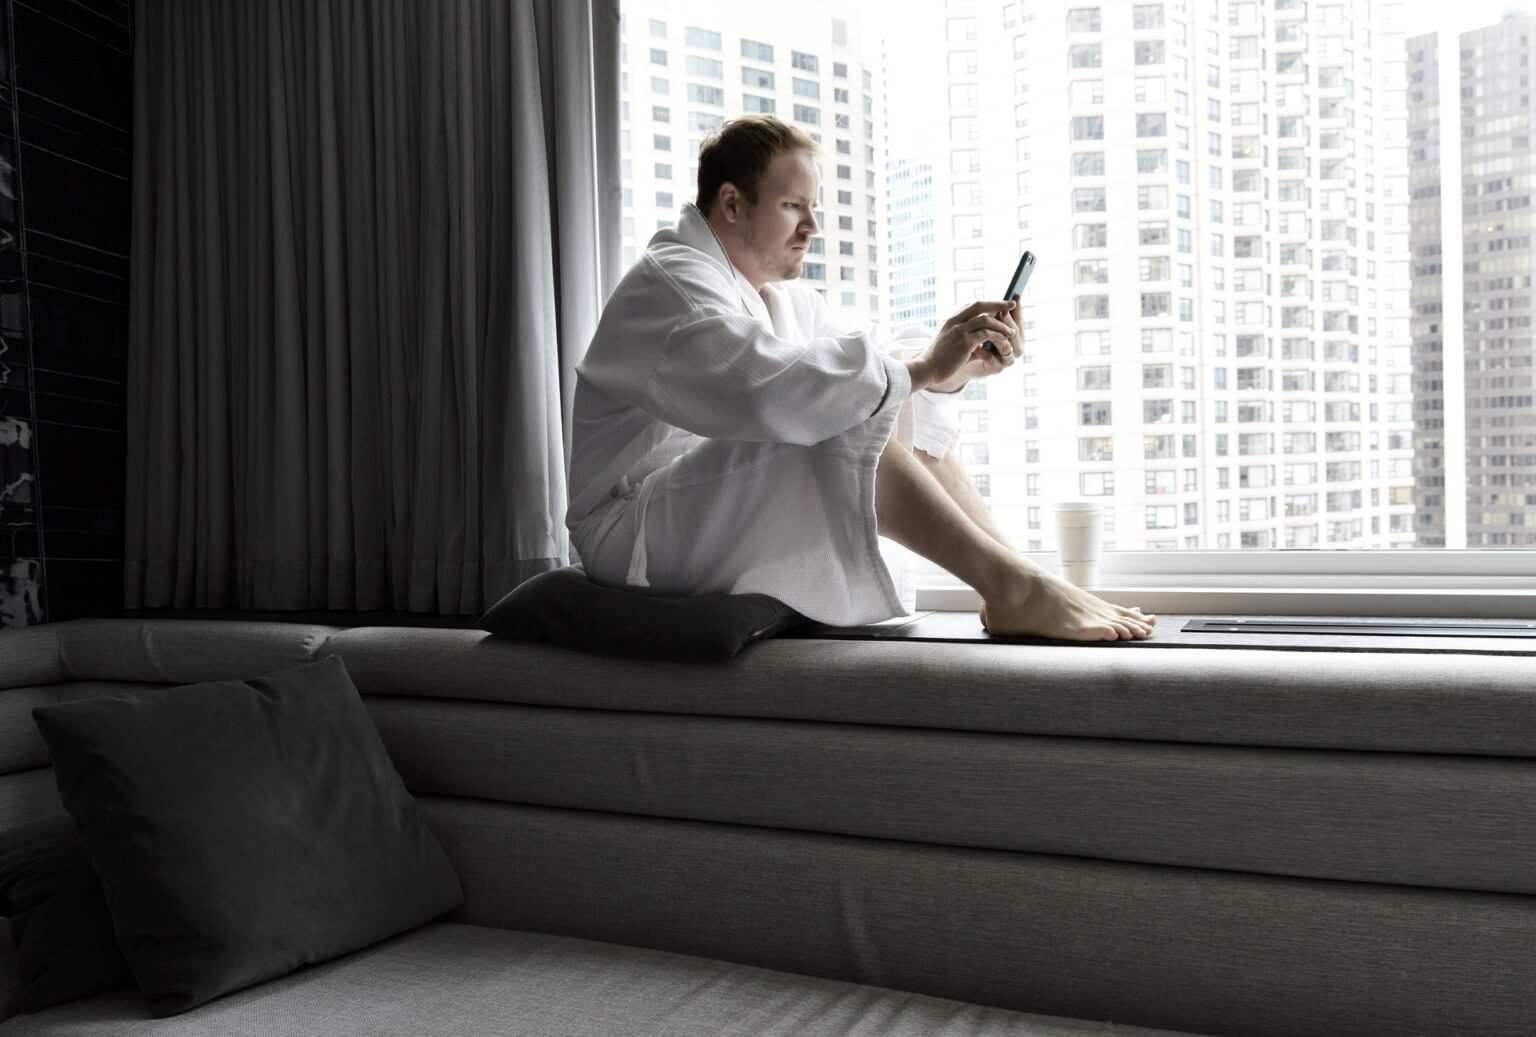 News addiction can overtake your life, as it may have with this person reading in a hotel room.